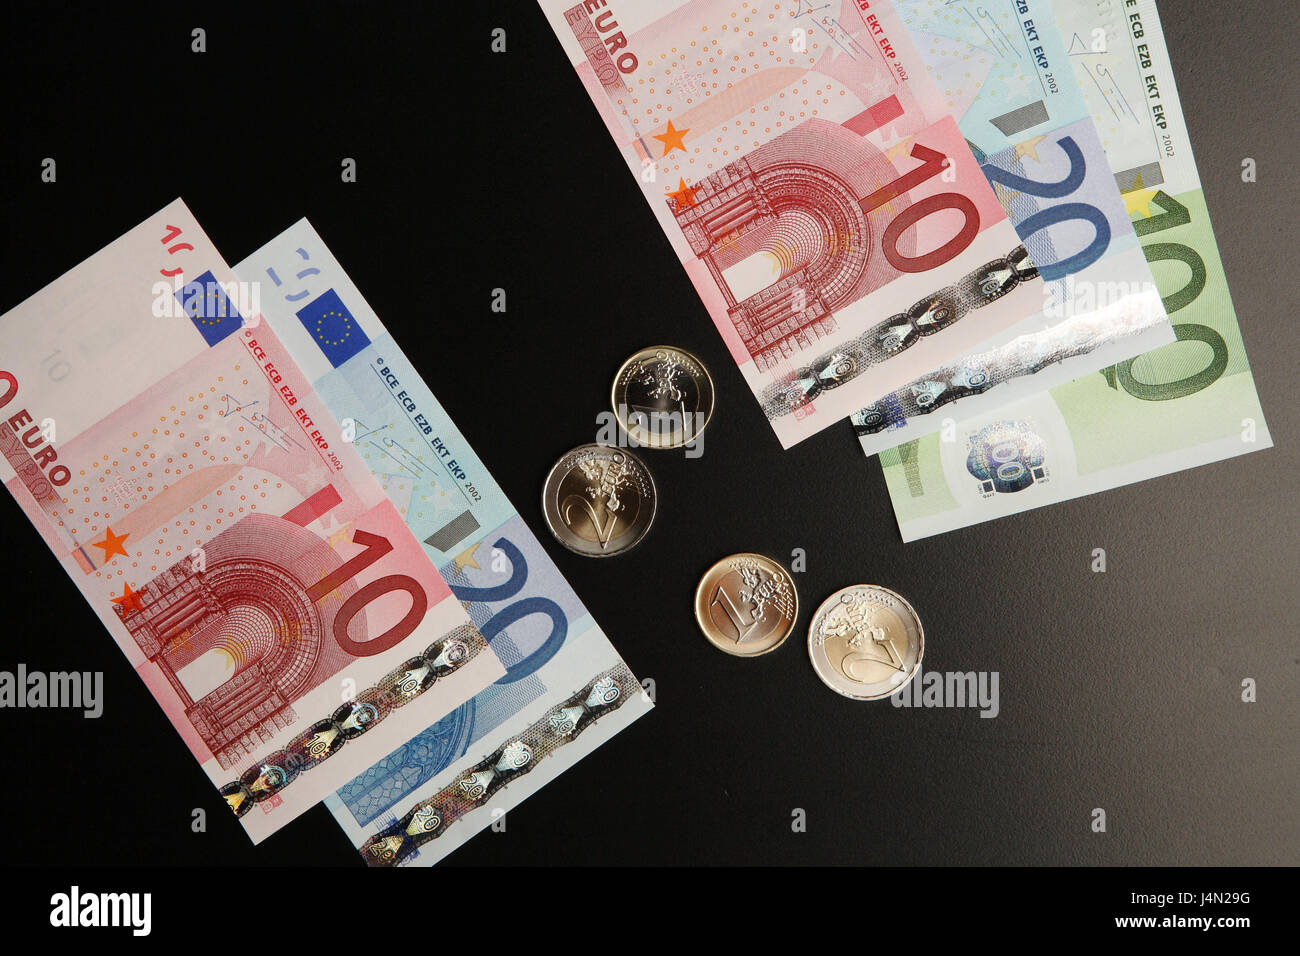 Money, euro, notes, coins, detail, banknotes, change, monetary coins, bank notes, cash, currency, single currency, European, twenty, ten, hundred, pay, bar, debts, having, savings, object photography, studio, Stock Photo